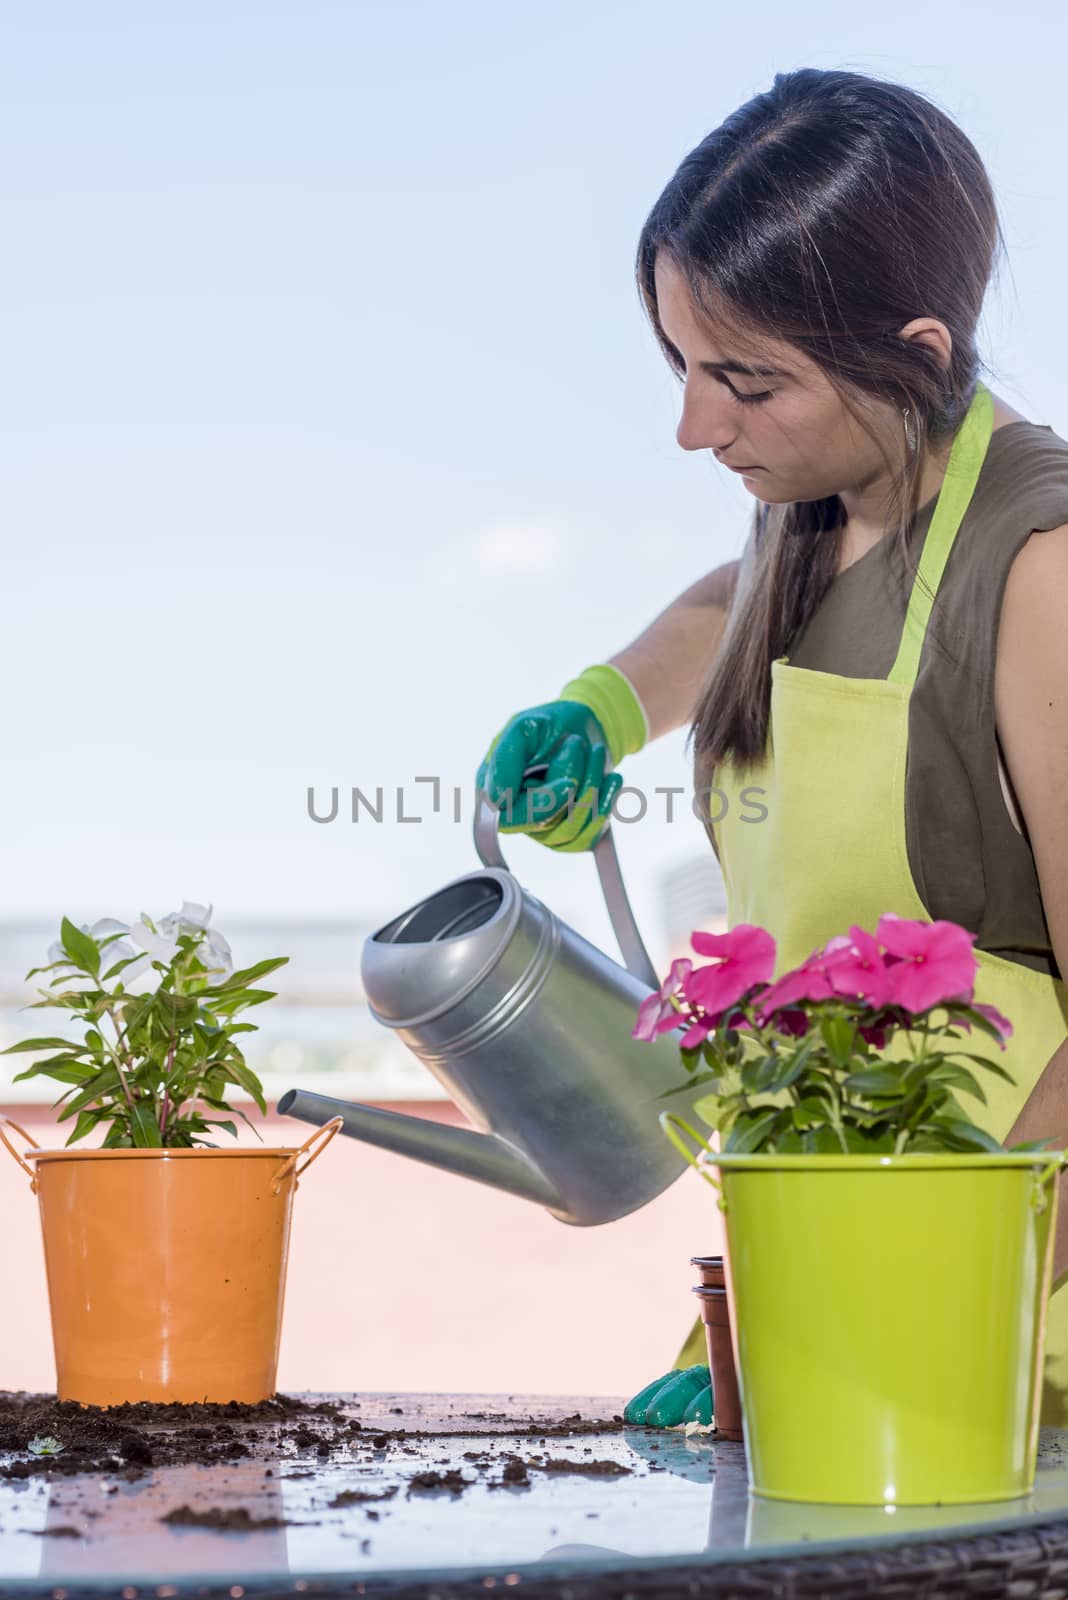 Young woman wearing a gardening apron while watering a home plant at a home terrace in a sunny day by raferto1973